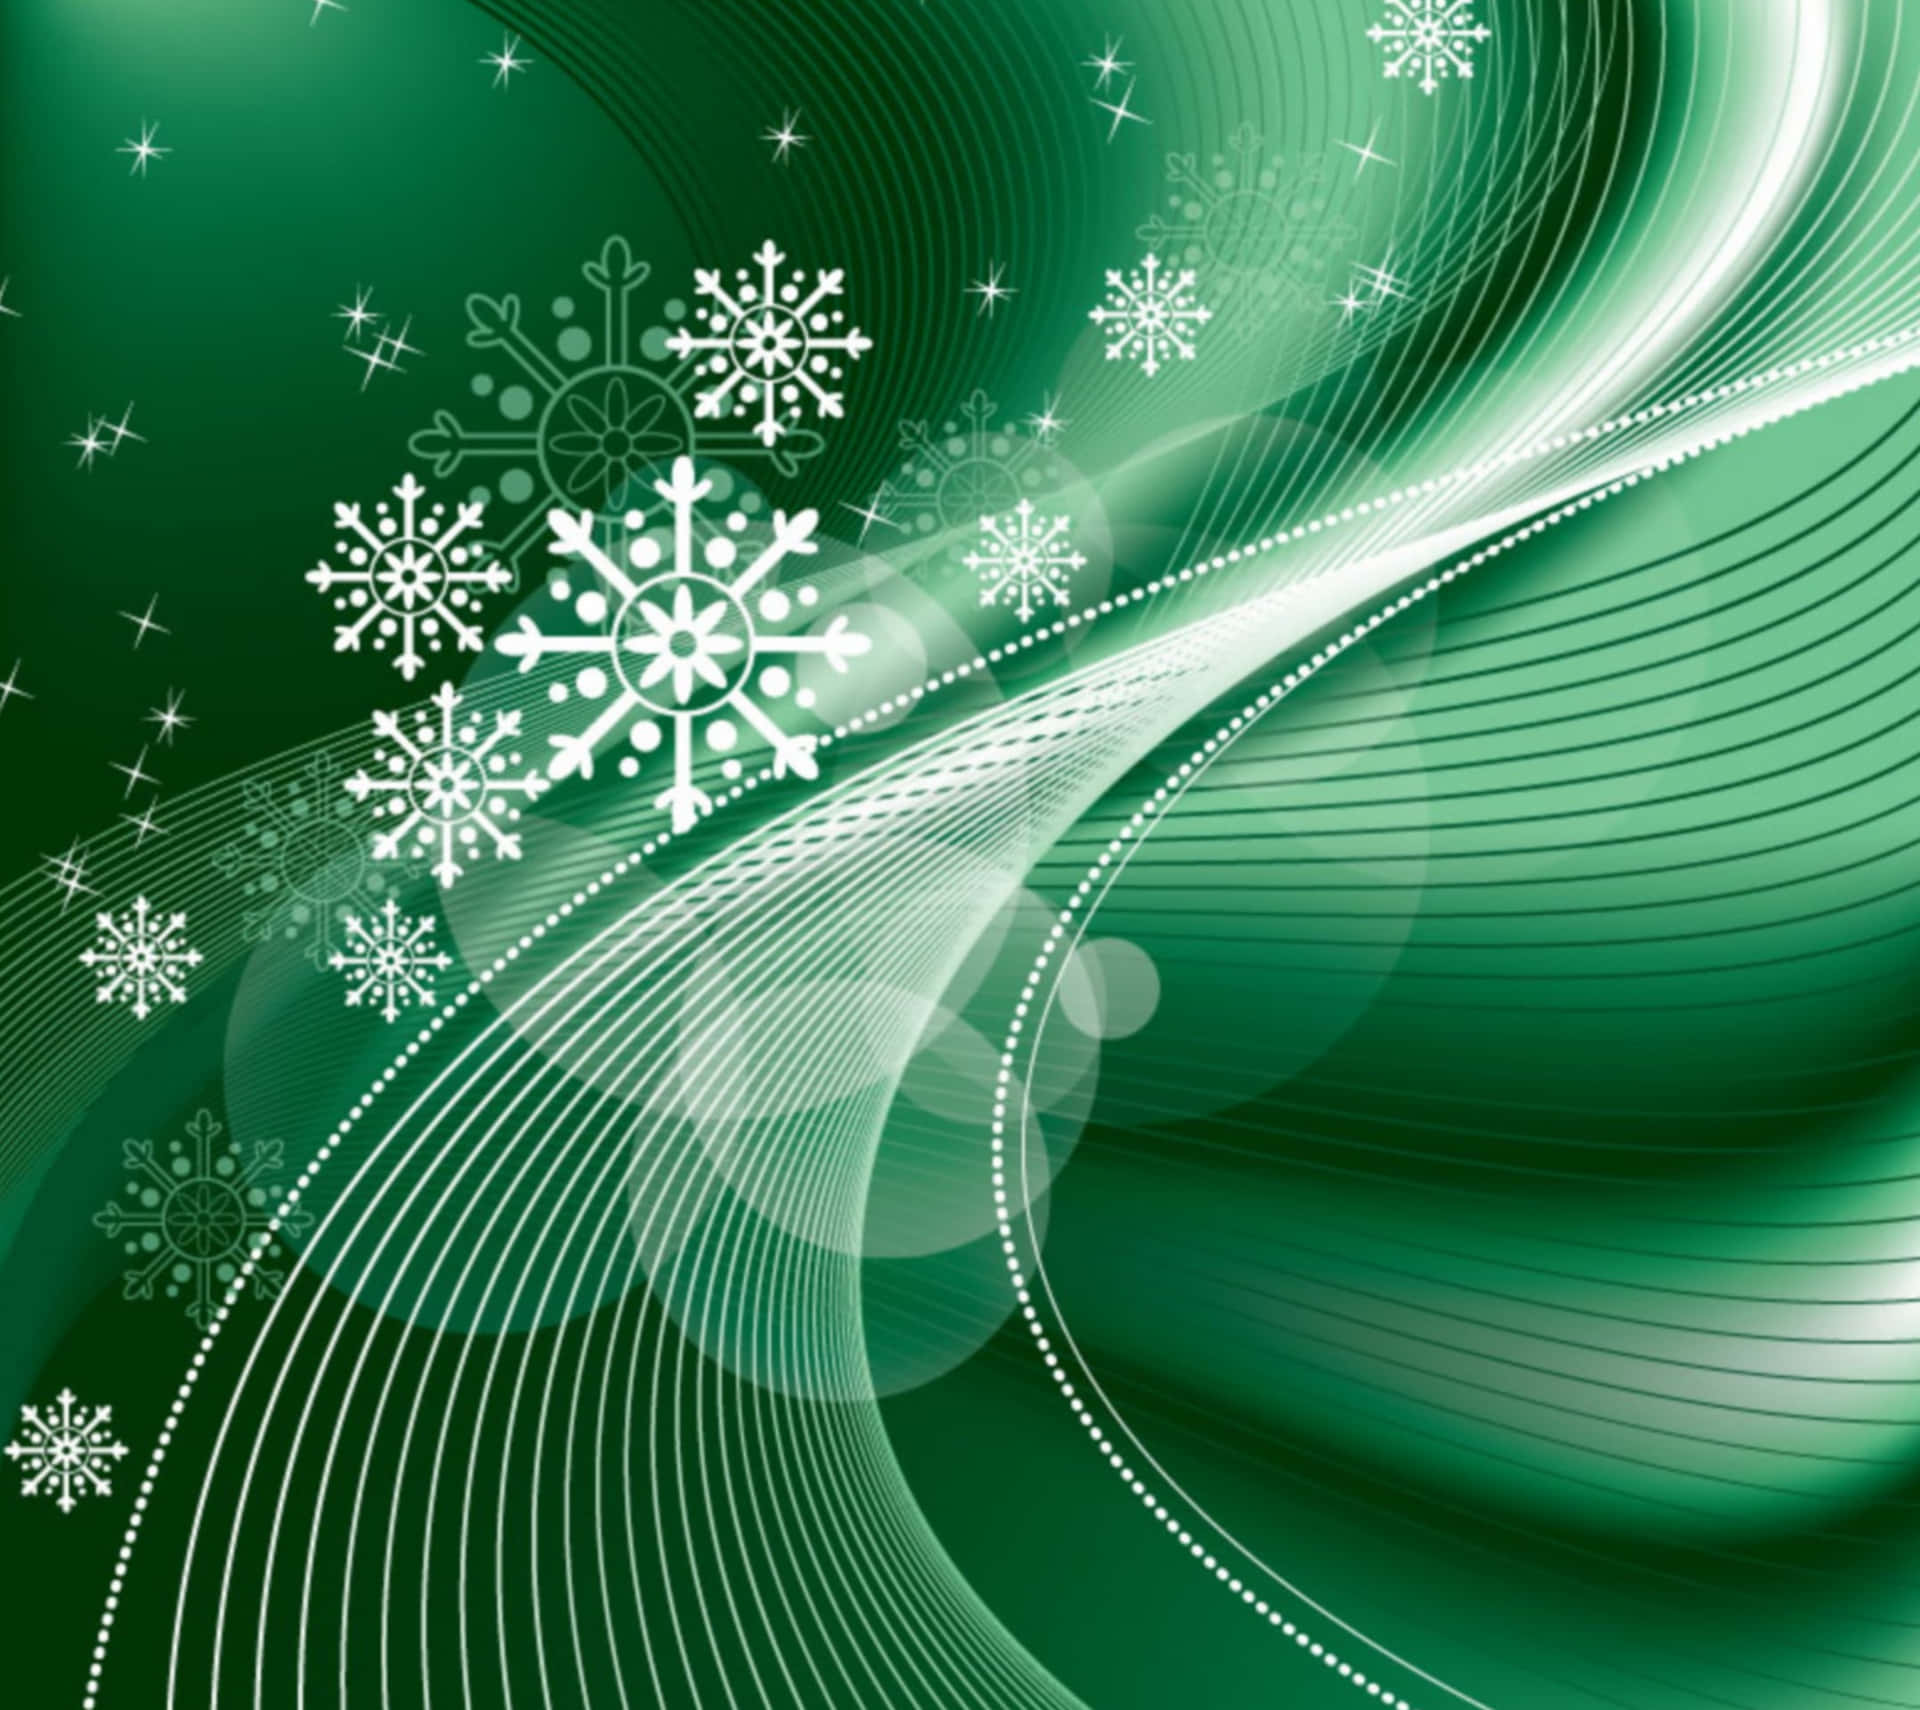 Celebrate an eco-friendly Christmas with a festive green and white background.